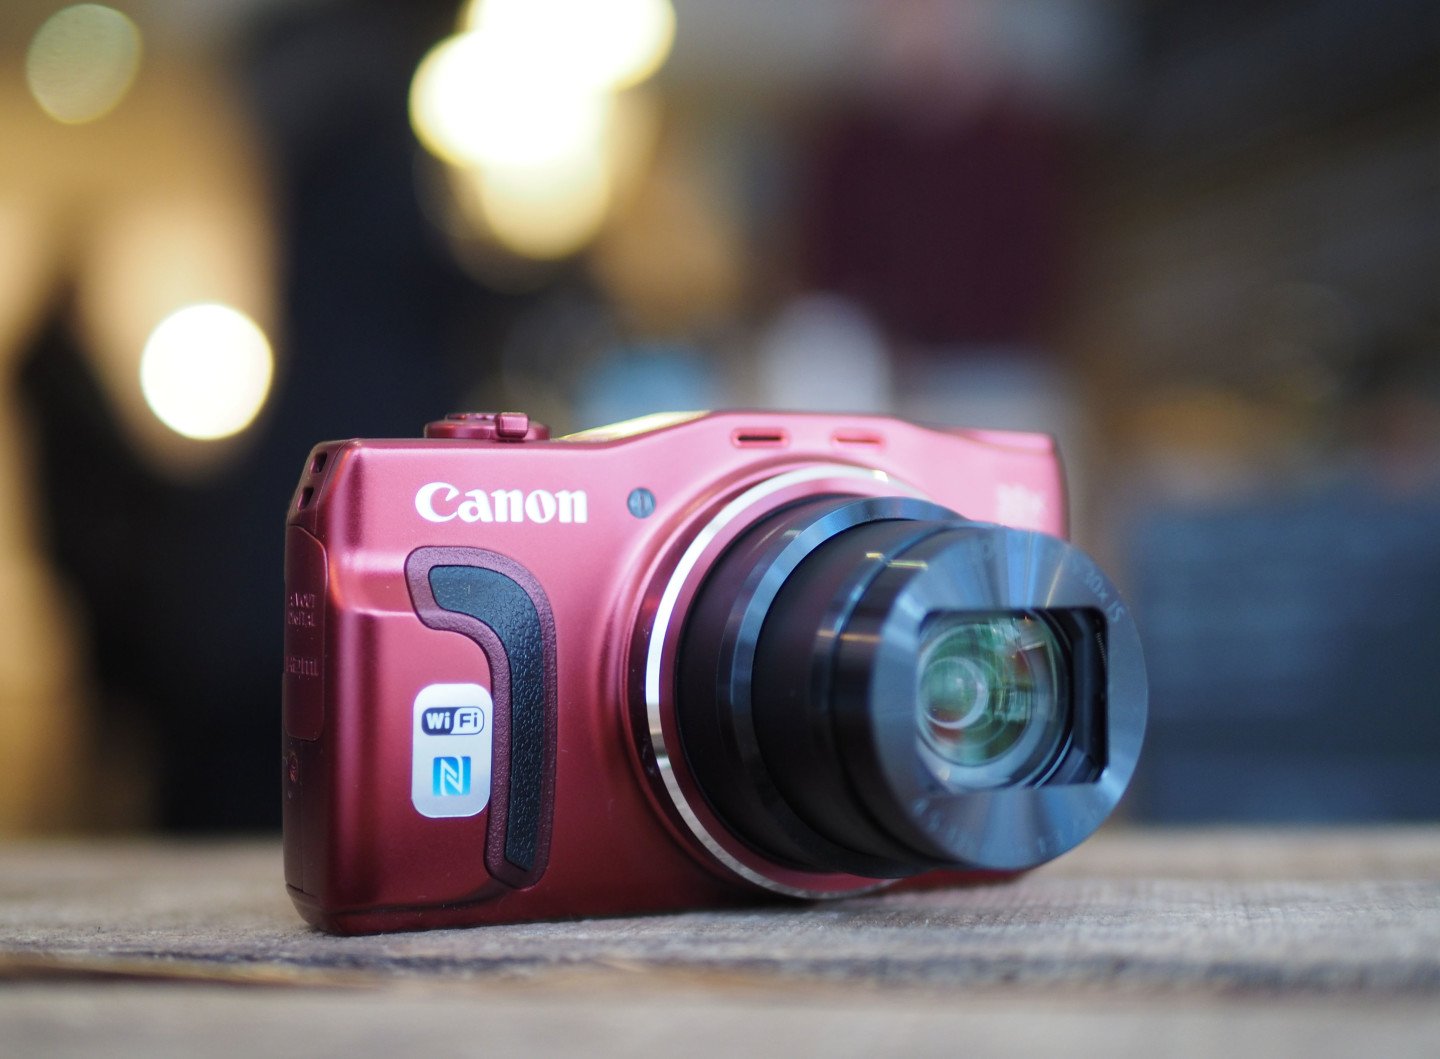 Canon SX710HS featured